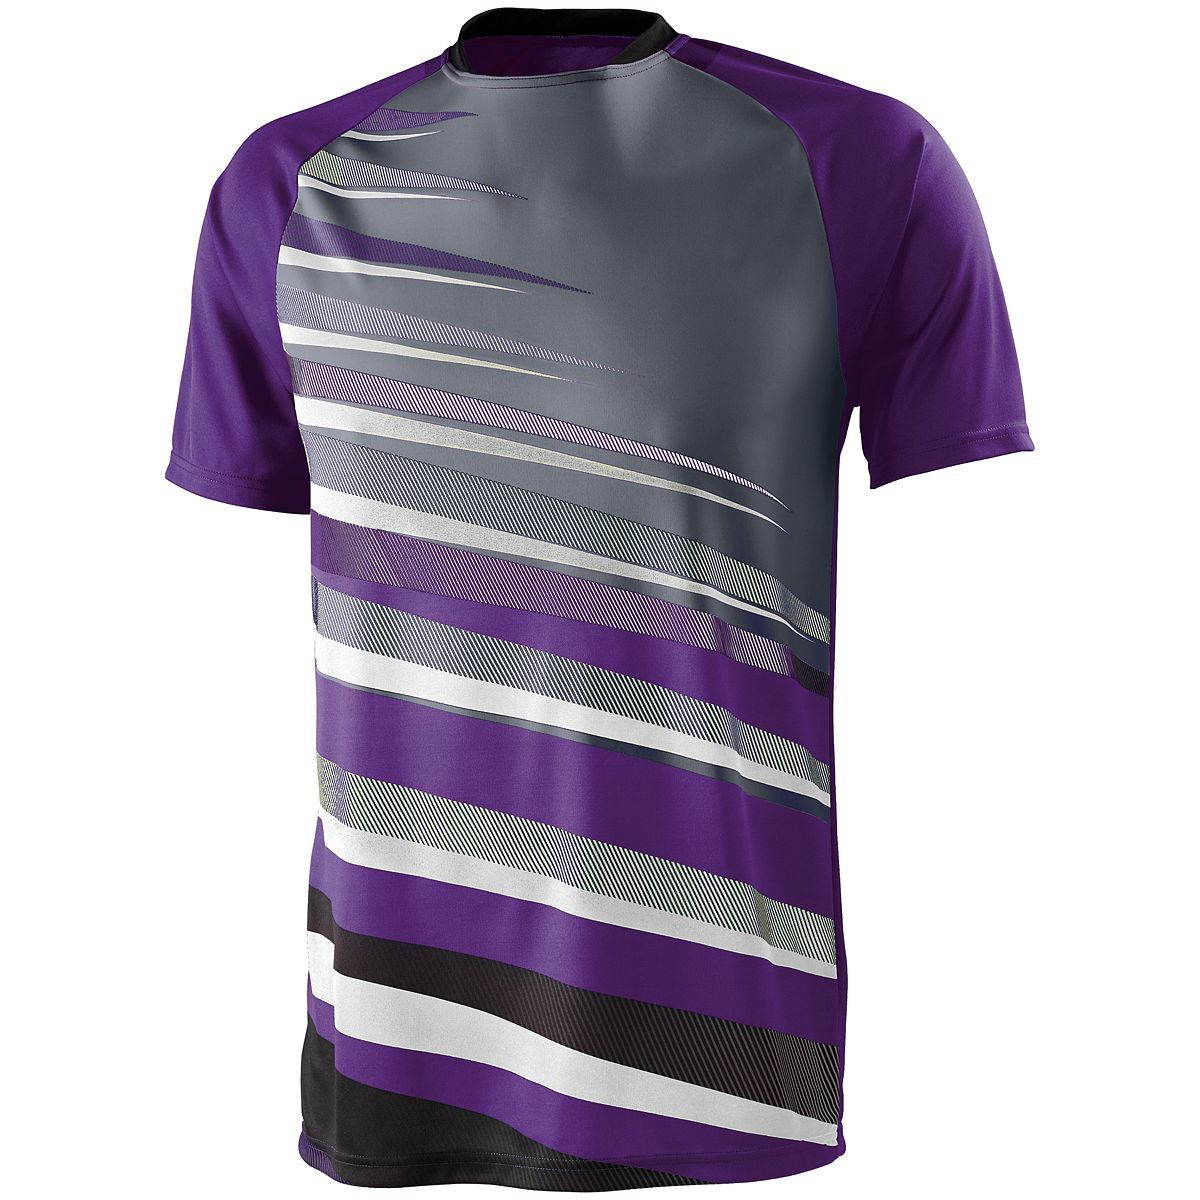 High 5 Adult Galactic Jersey in Purple/Black/Graphite  -Part of the Adult, Adult-Jersey, High5-Products, Soccer, Shirts, All-Sports-1 product lines at KanaleyCreations.com